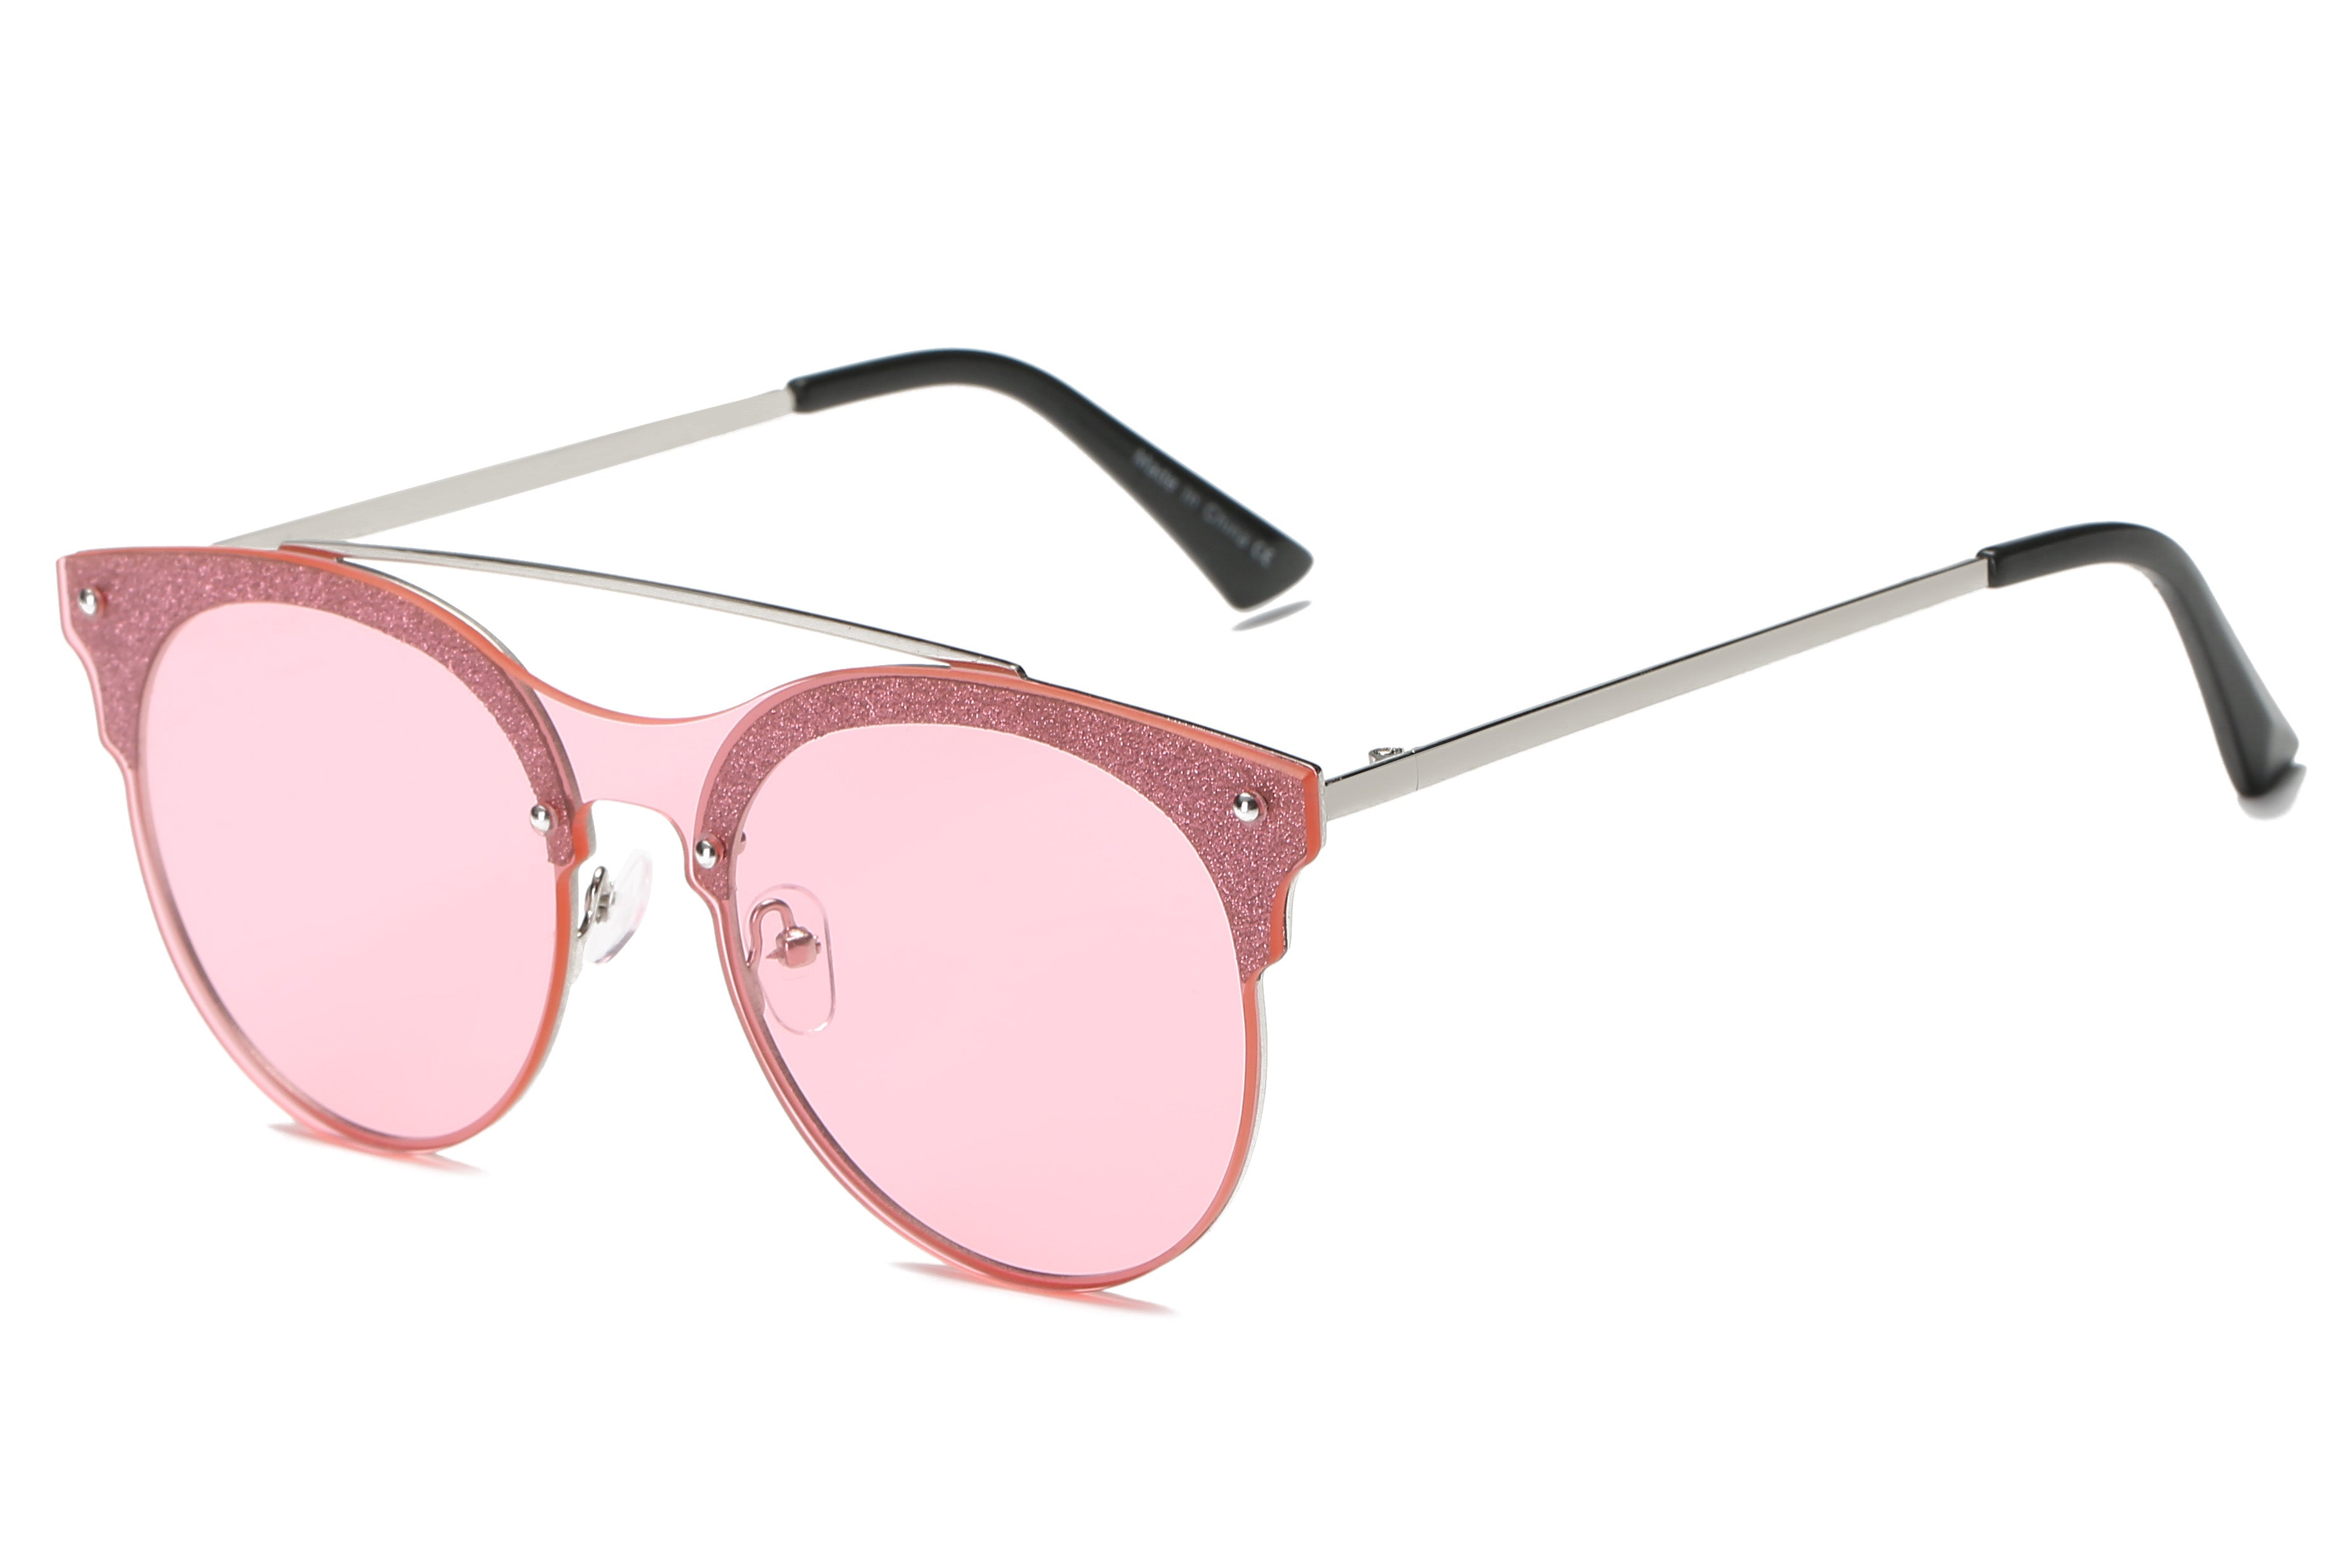 S3011 - Round Circle Double Bar Tinted Fashion SUNGLASSES Silver/Pink